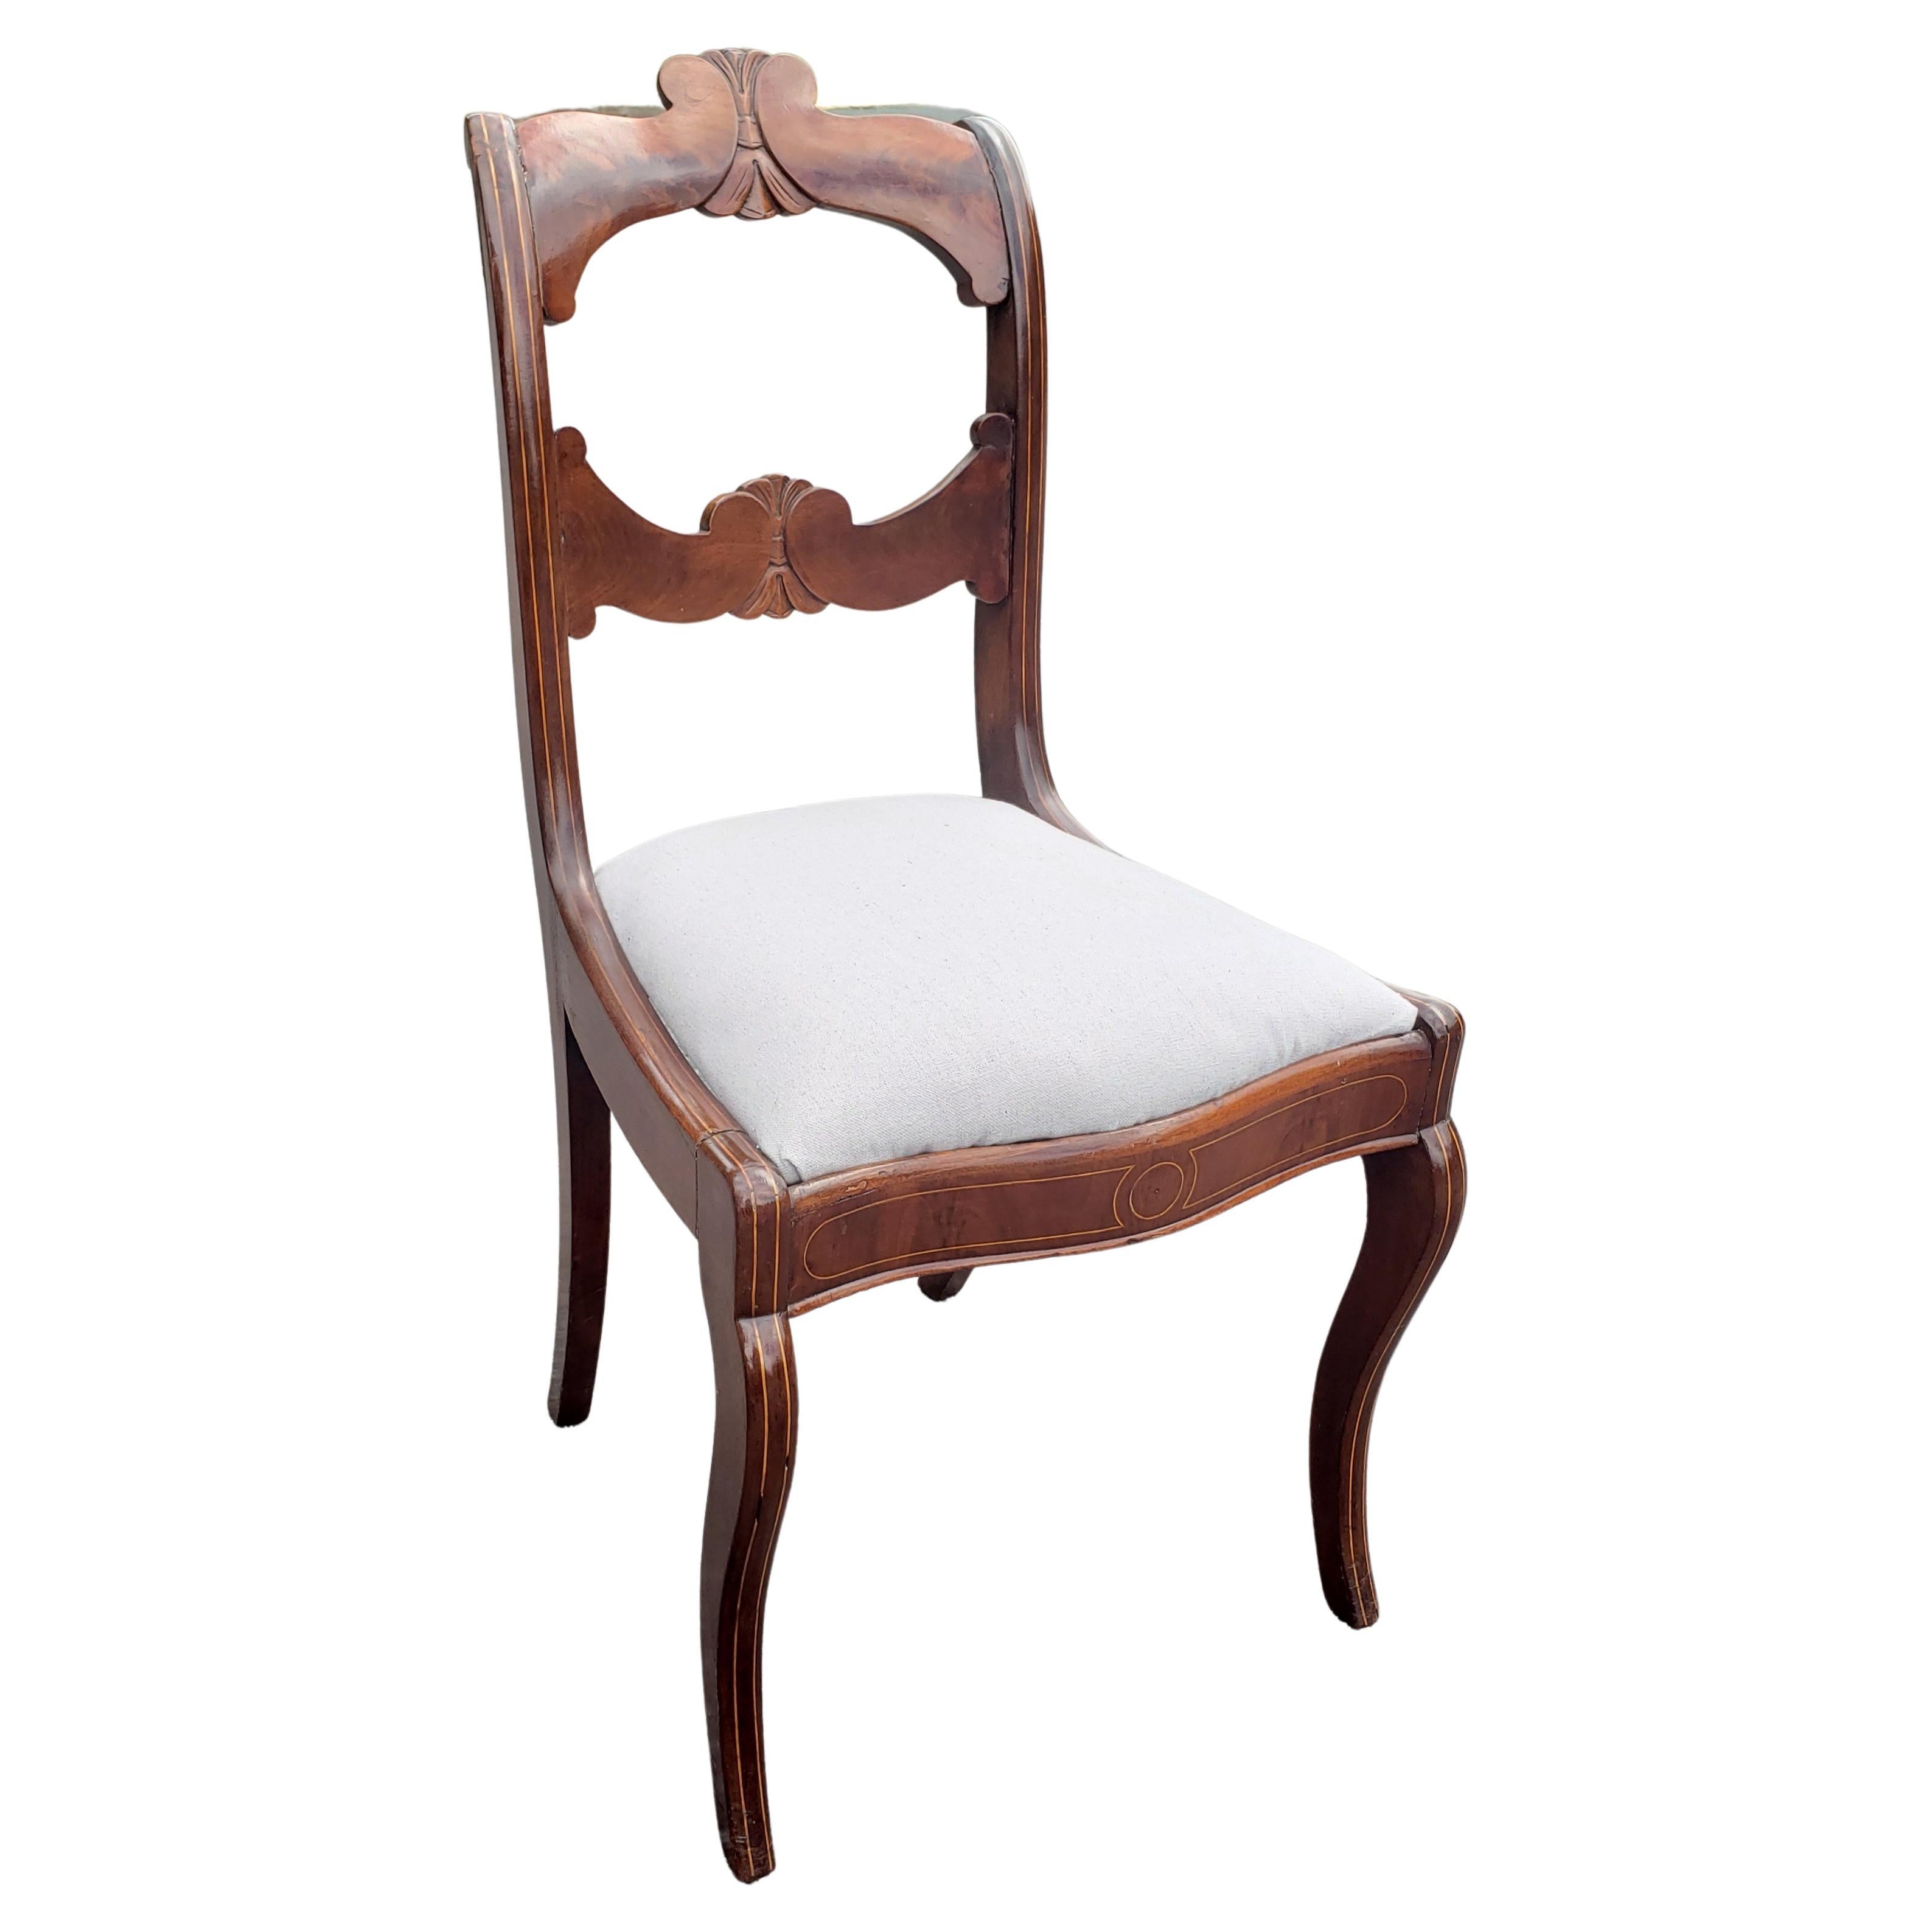 A late 19th Century Flame Mahogany and Satinwood Inlaid with Upholstered Seat Side Chair.
Measures 17.5